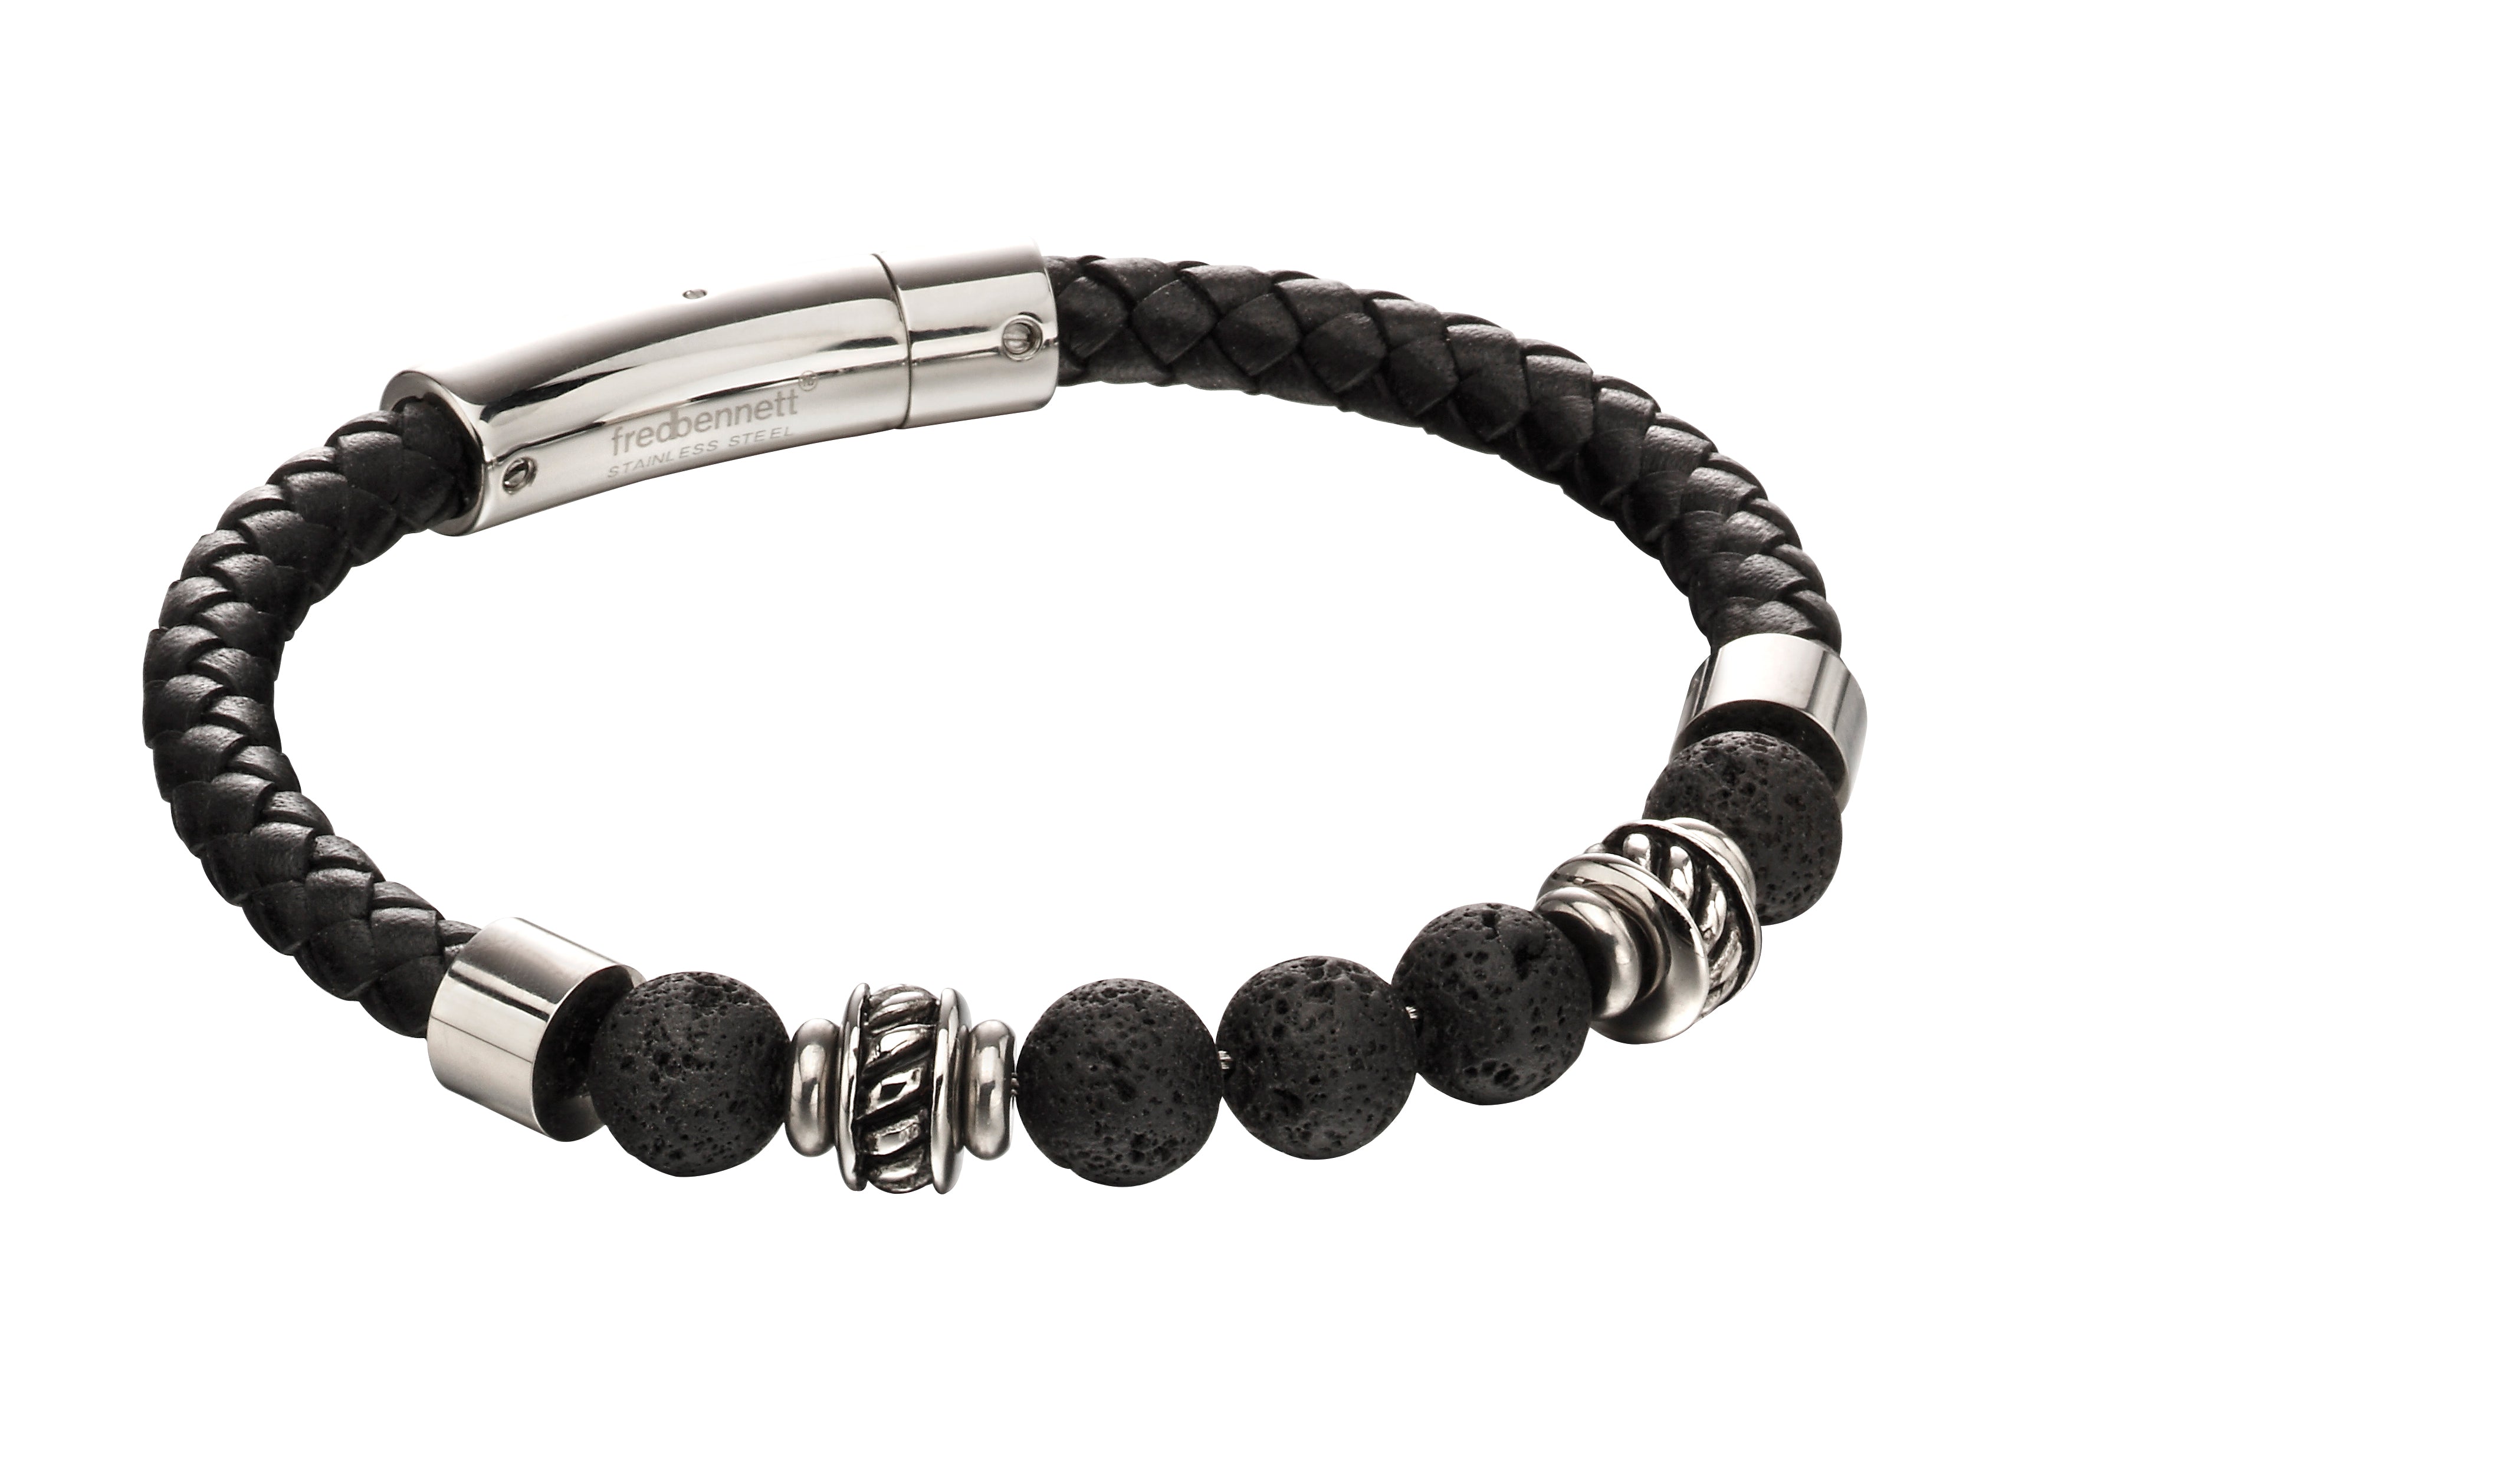 Stainless Steel & Black Leather with Lava Stones Bracelet - FB0007 - Hallmark Jewellers Formby & The Jewellers Bench Widnes